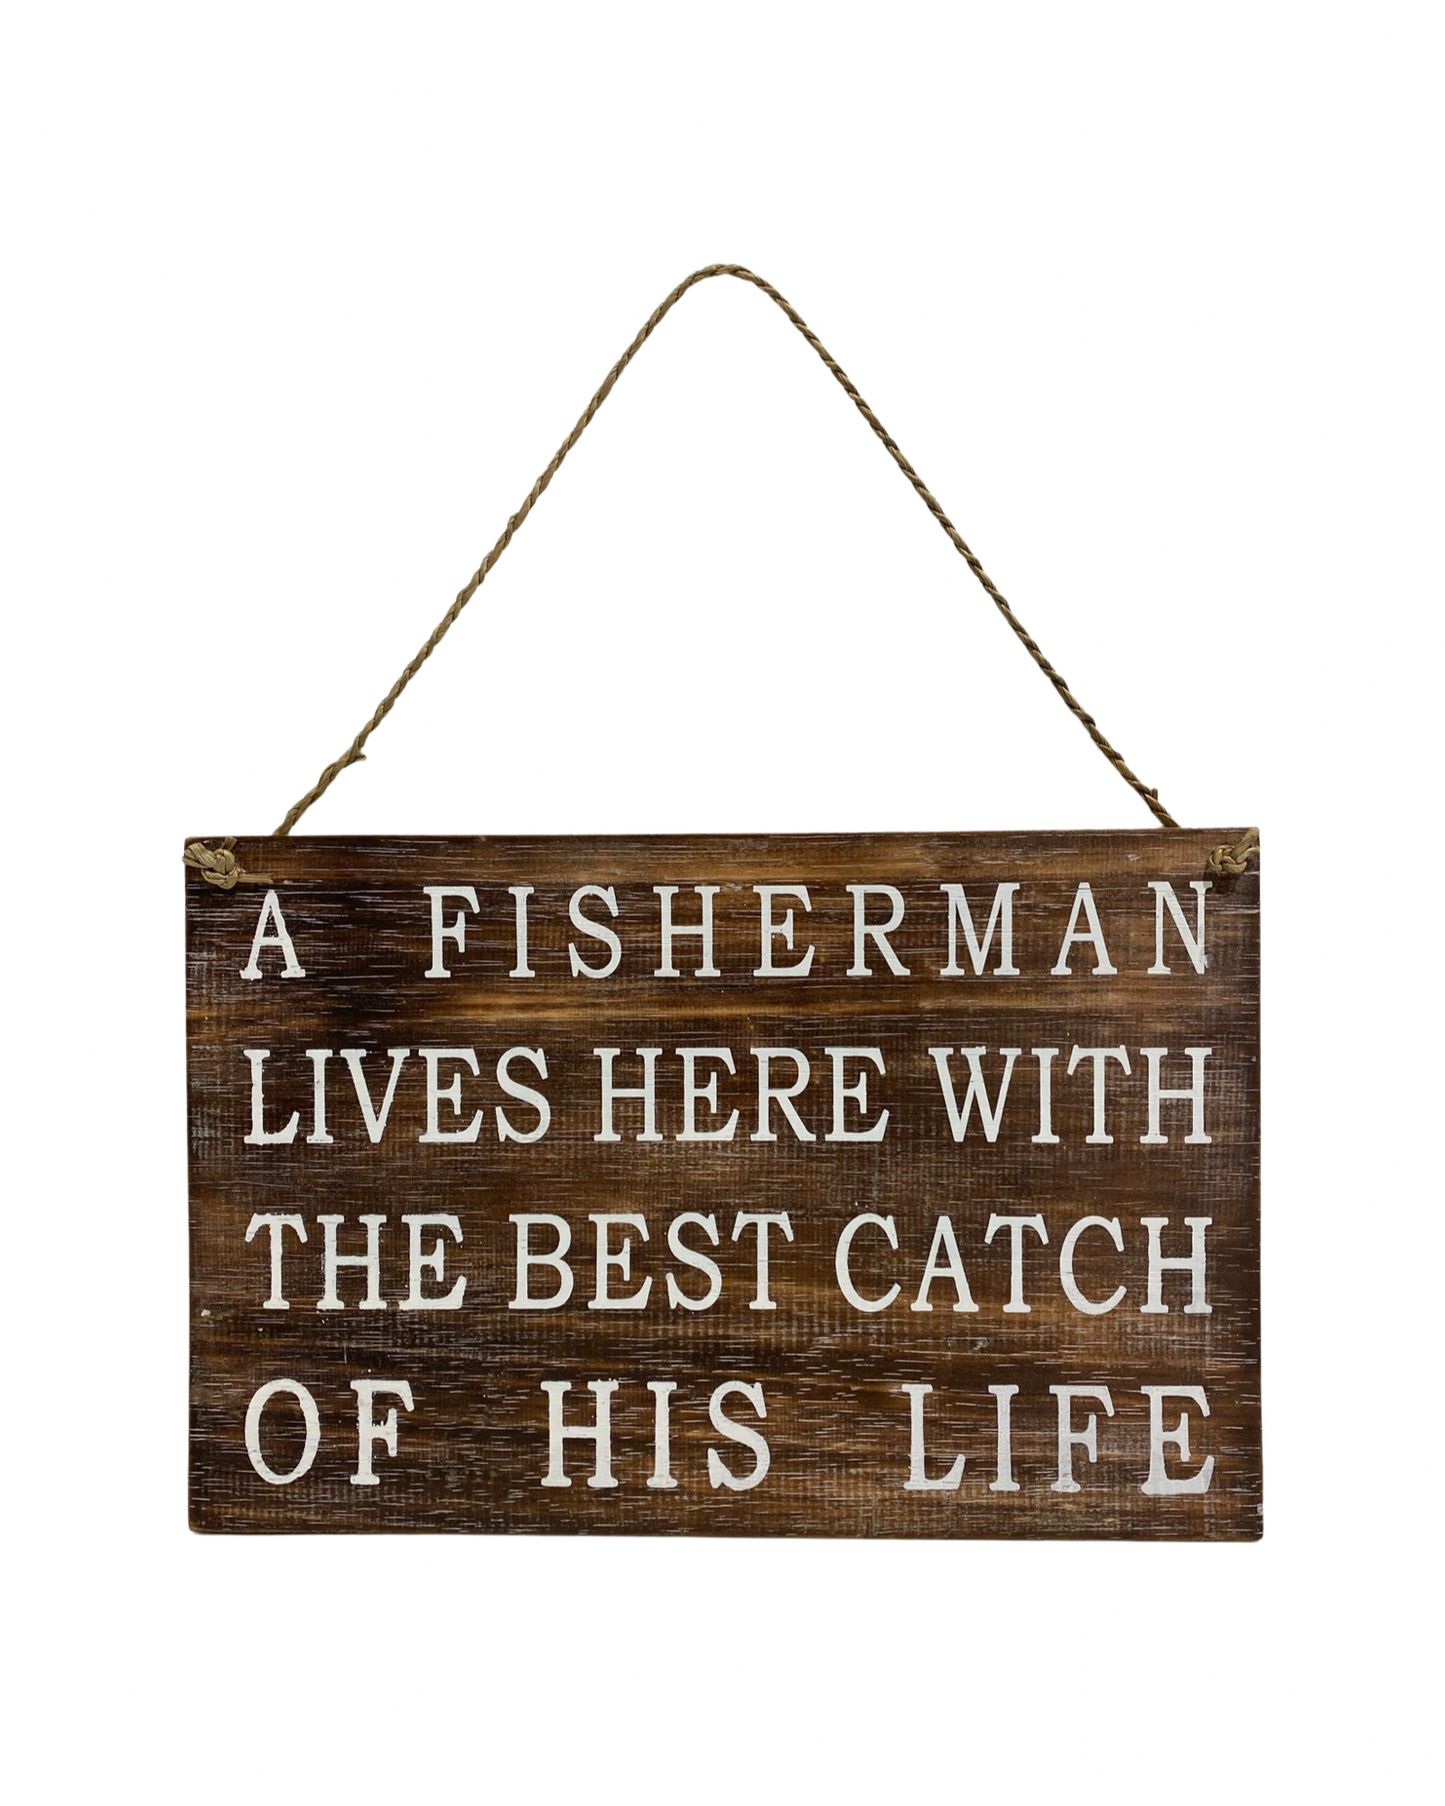 A Fisherman Live Here With The Best Catch Of His Life sign